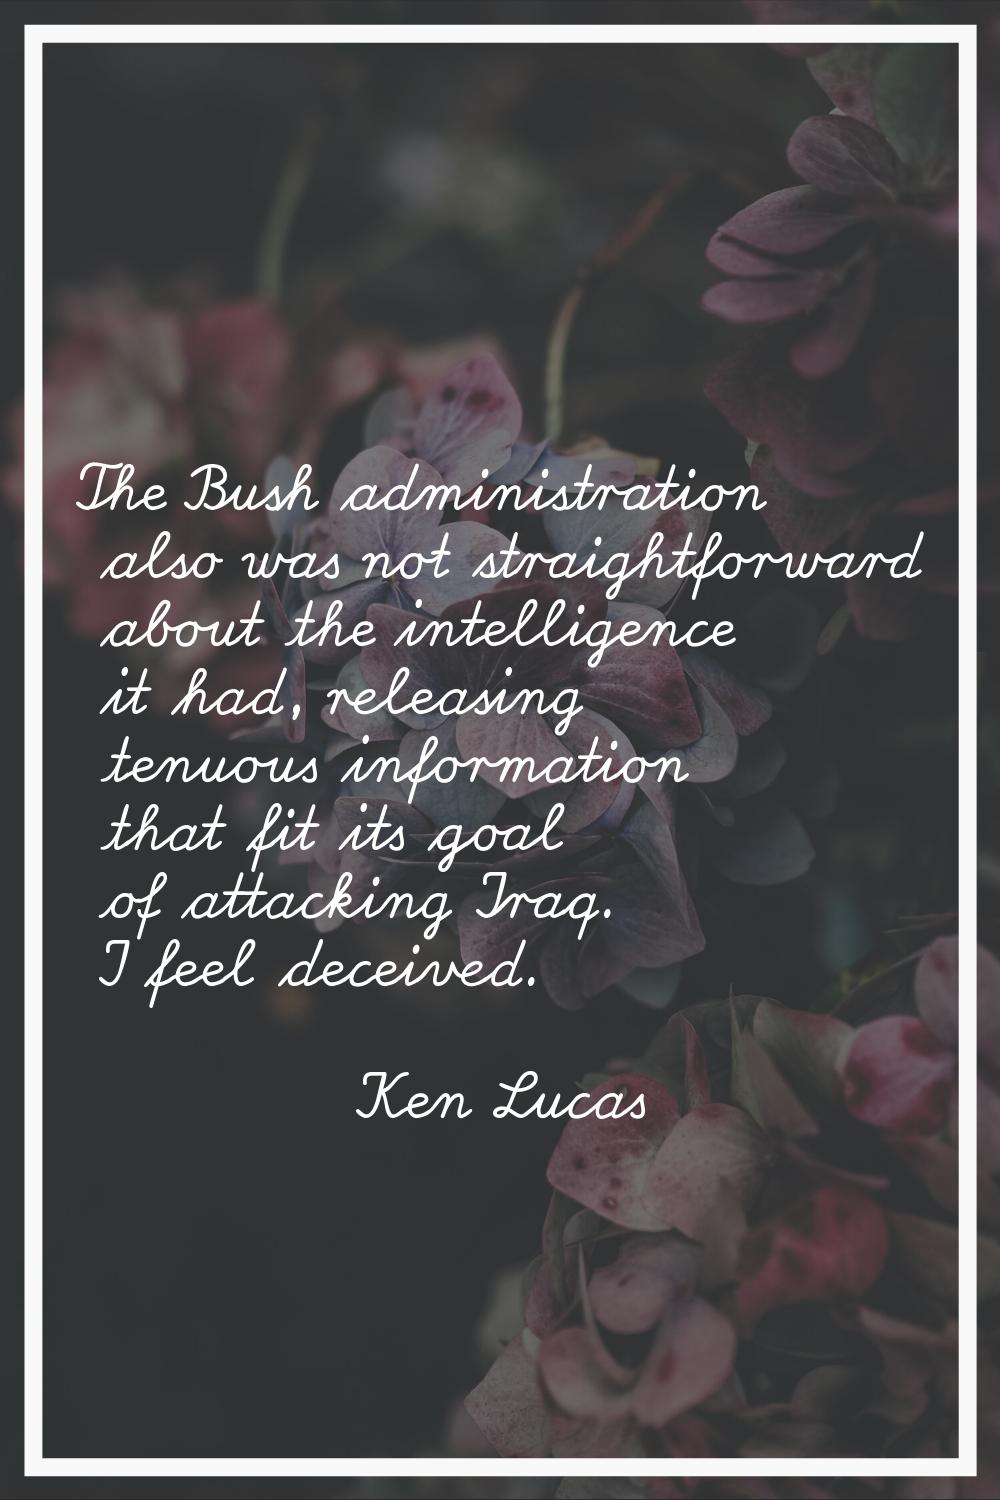 The Bush administration also was not straightforward about the intelligence it had, releasing tenuo